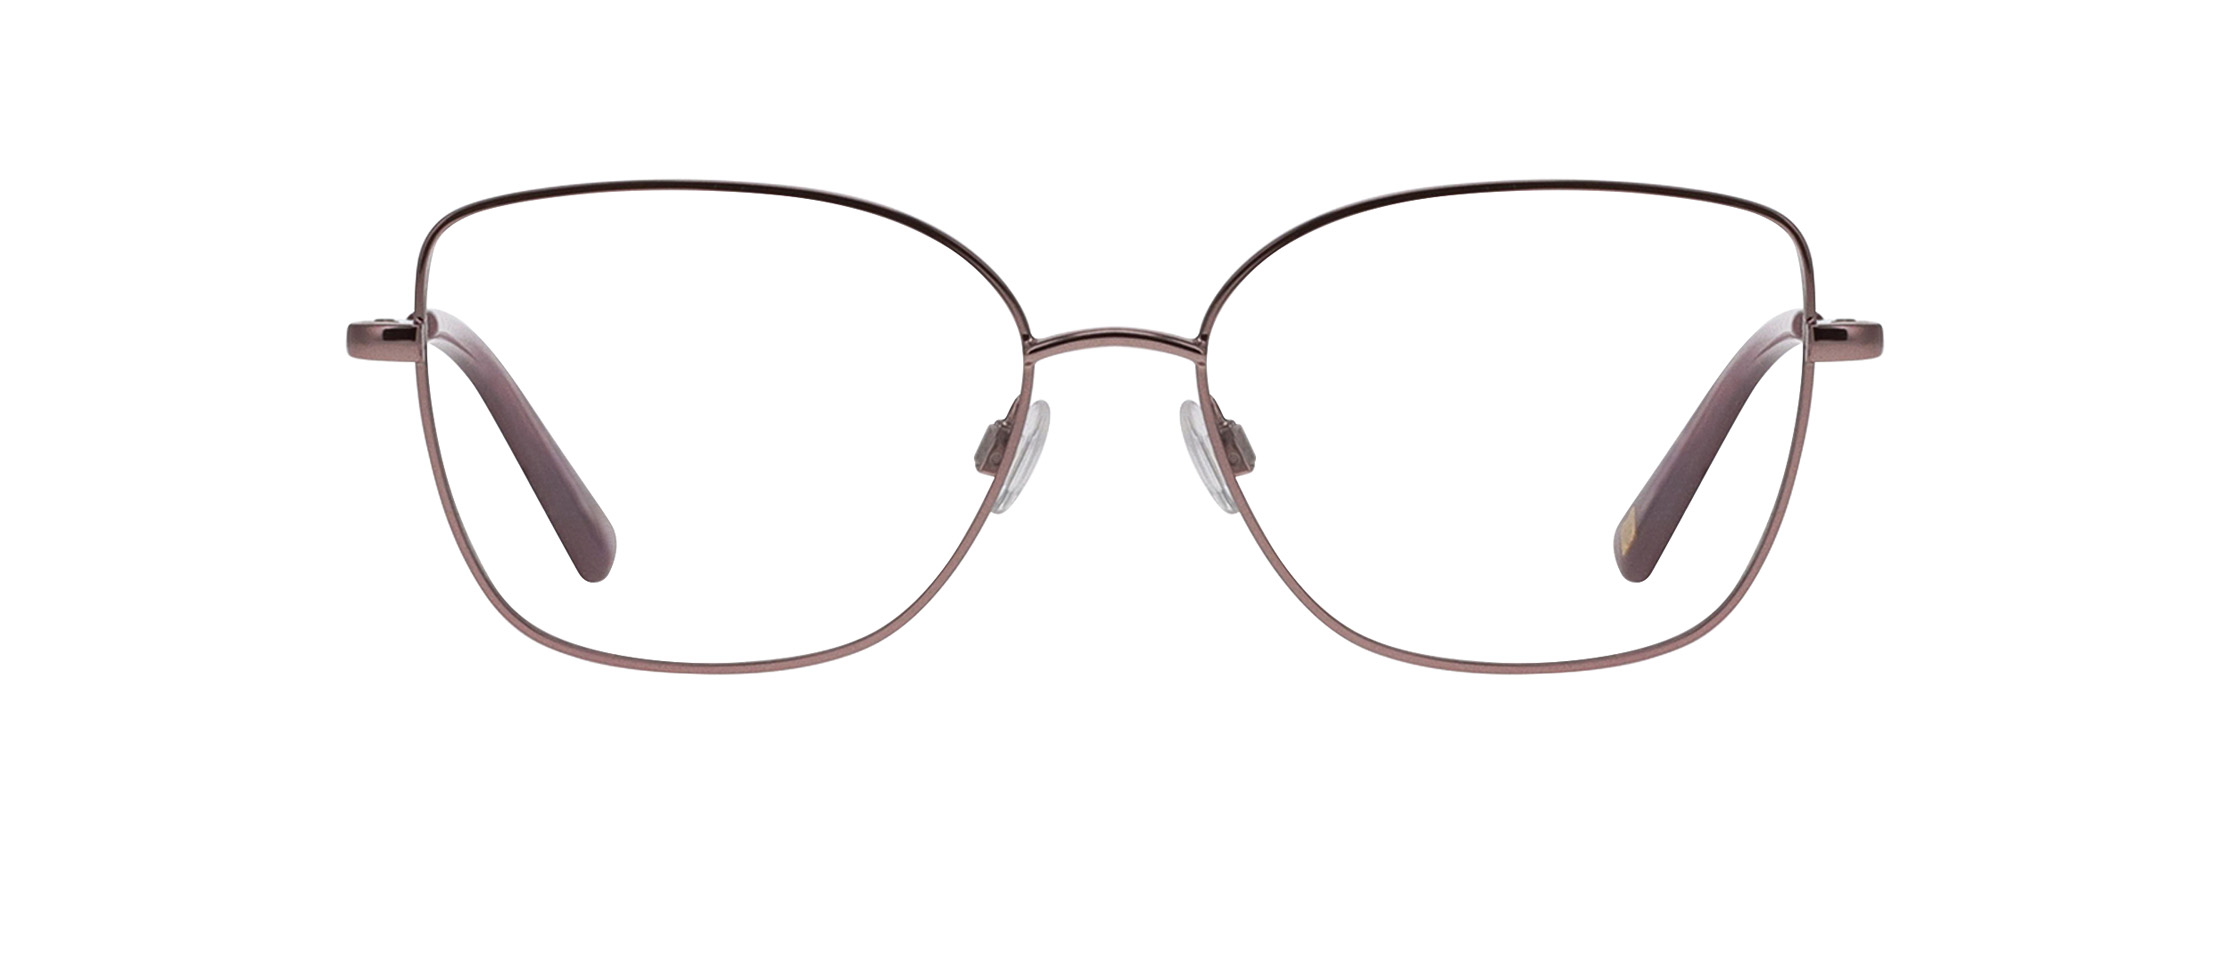 Anne Klein AK5099 Glasses | Free Shipping and Returns | Eyeconic